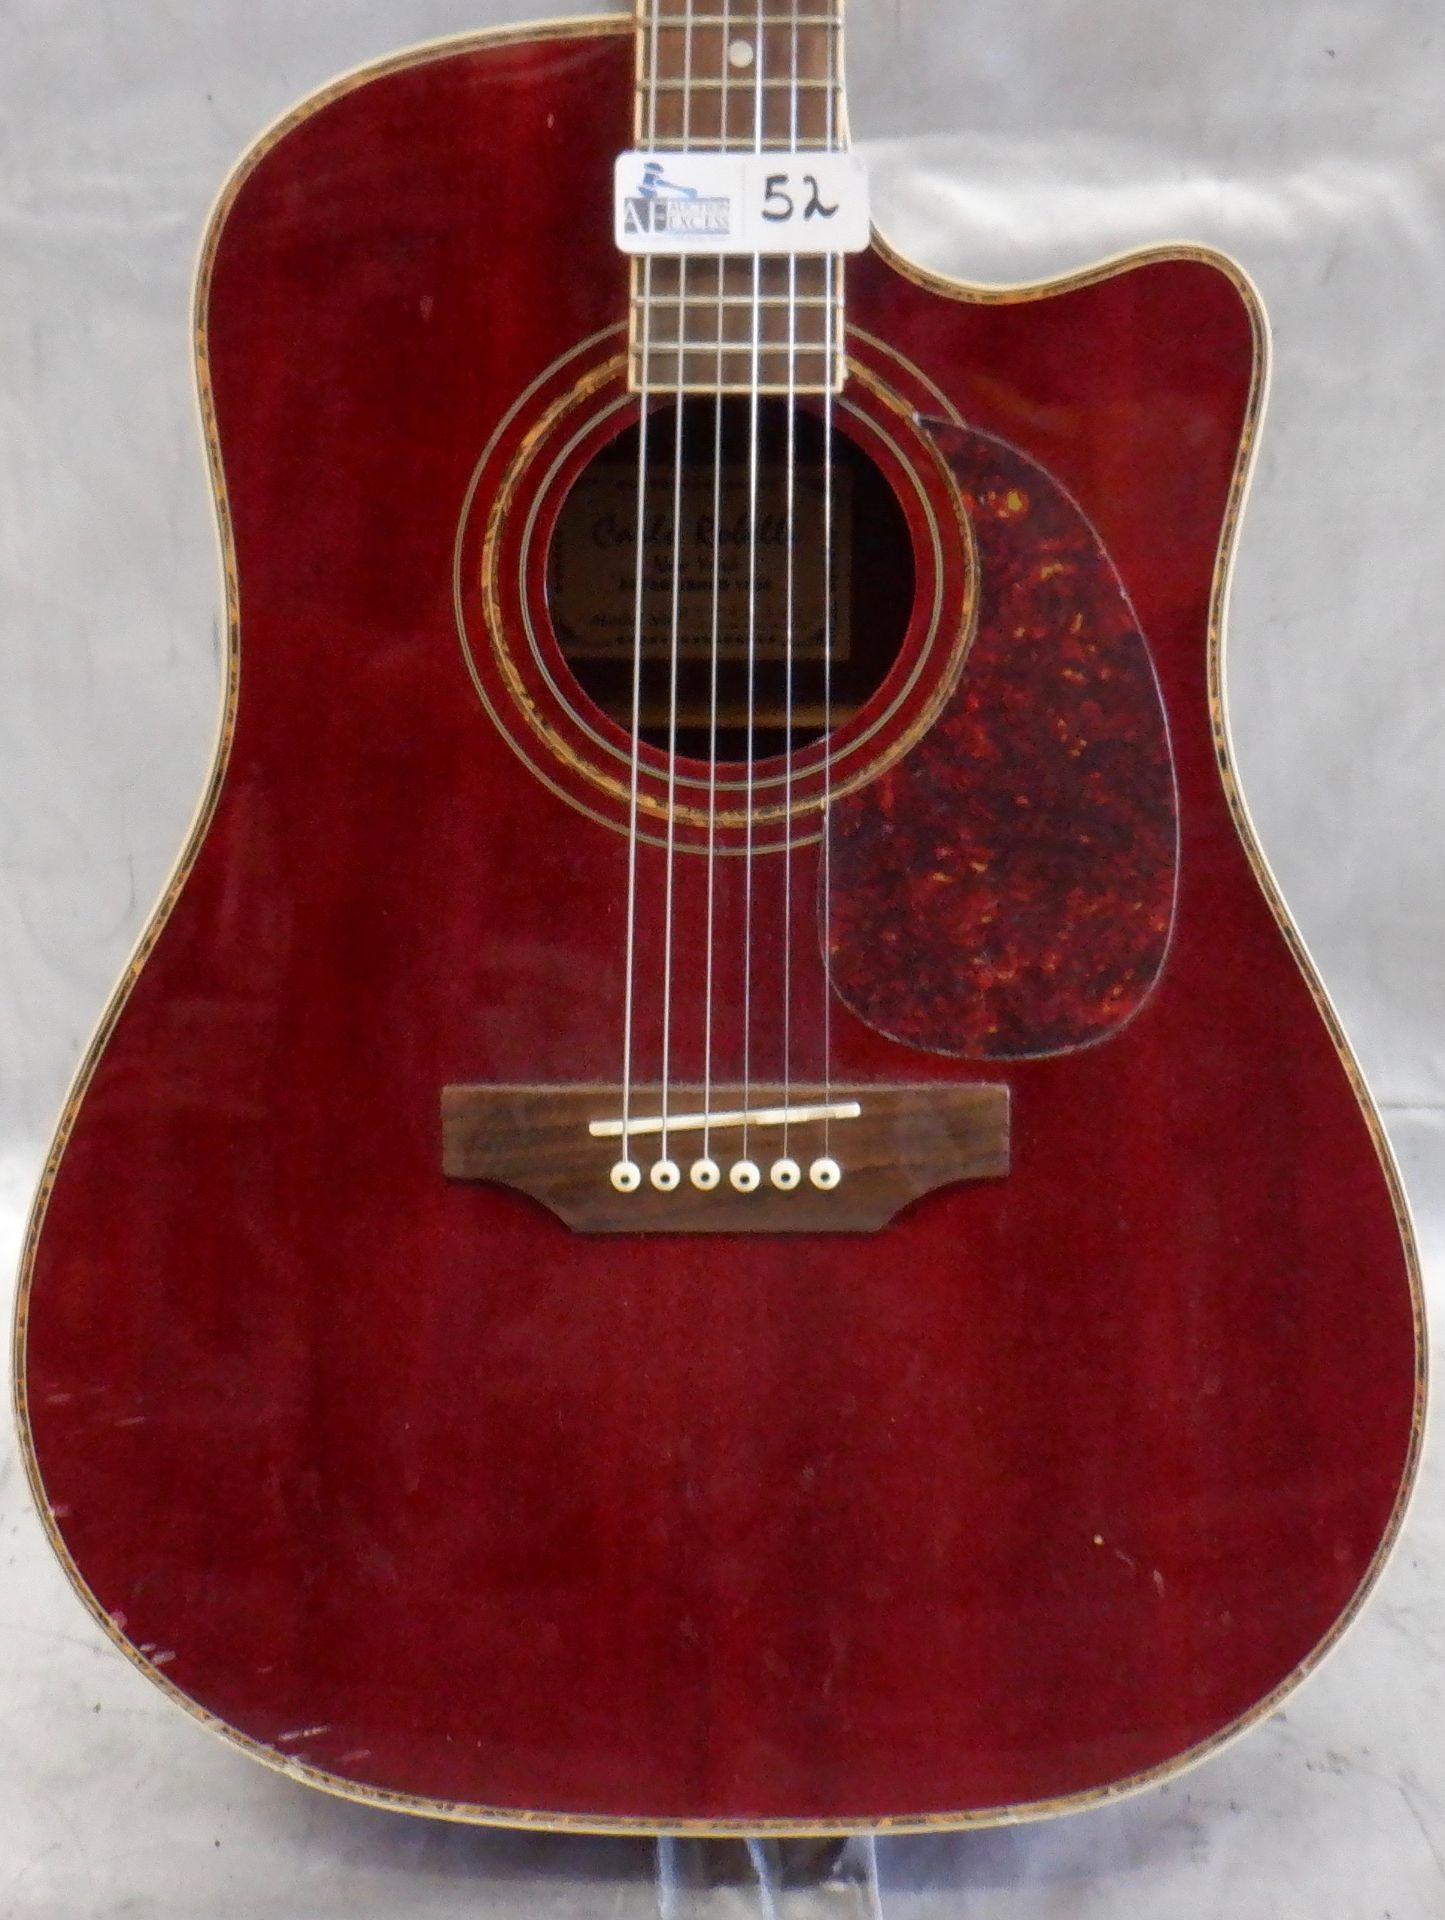 CARLO ROBELLI ACOUSTIC GUITAR WITH CASE - Image 2 of 7